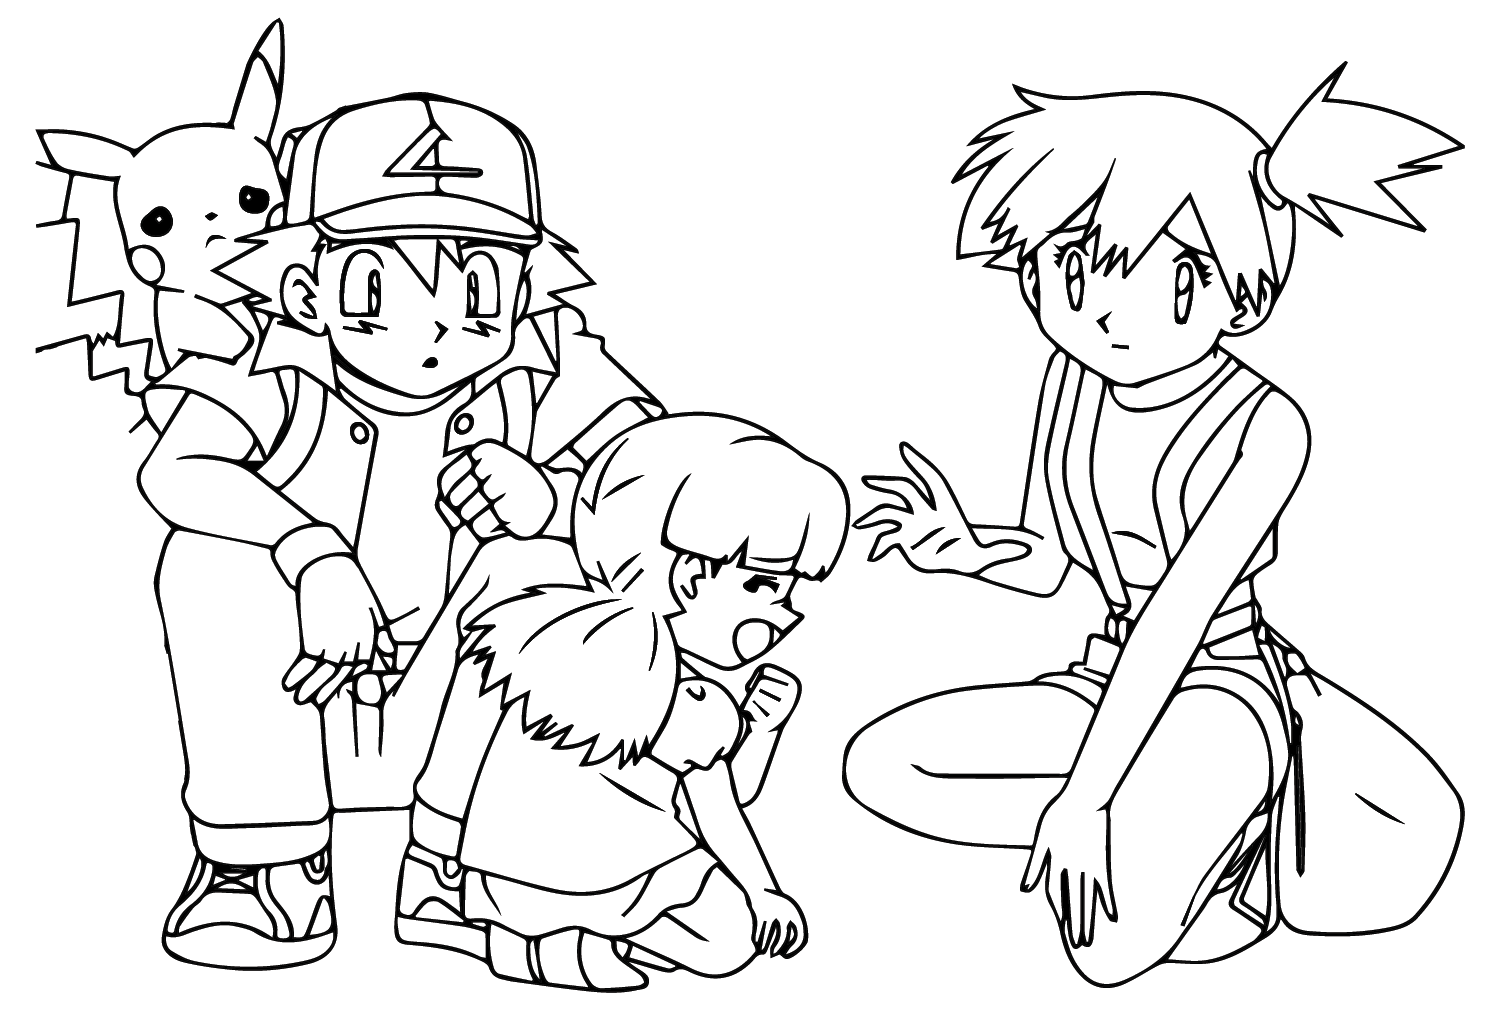 Ash,Misty to Color from Misty